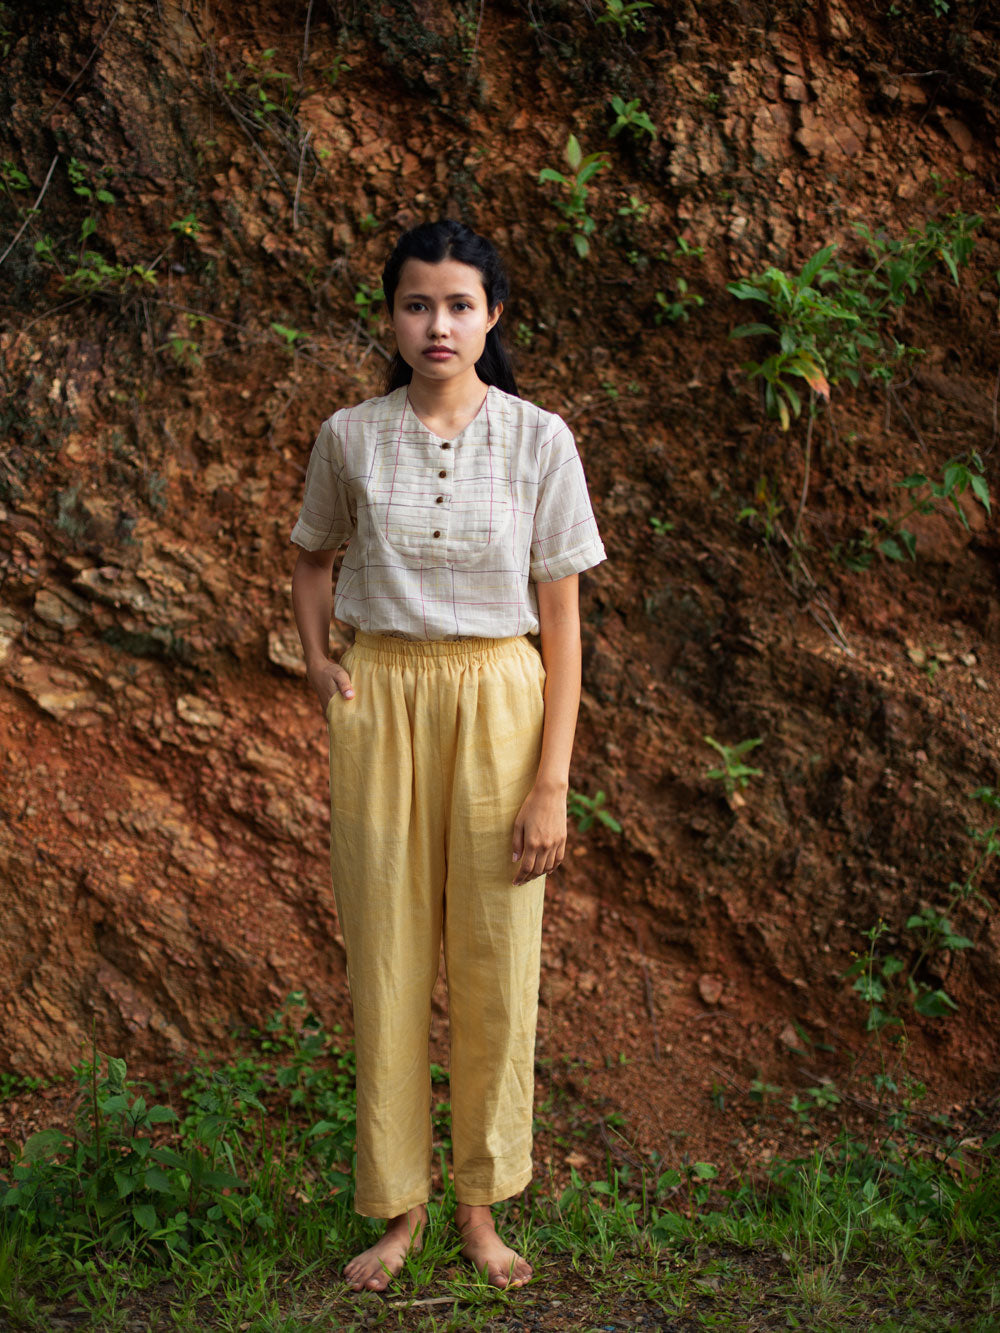 Handwoven cotton top with pleated bib, designed by Khumanthem Atelier